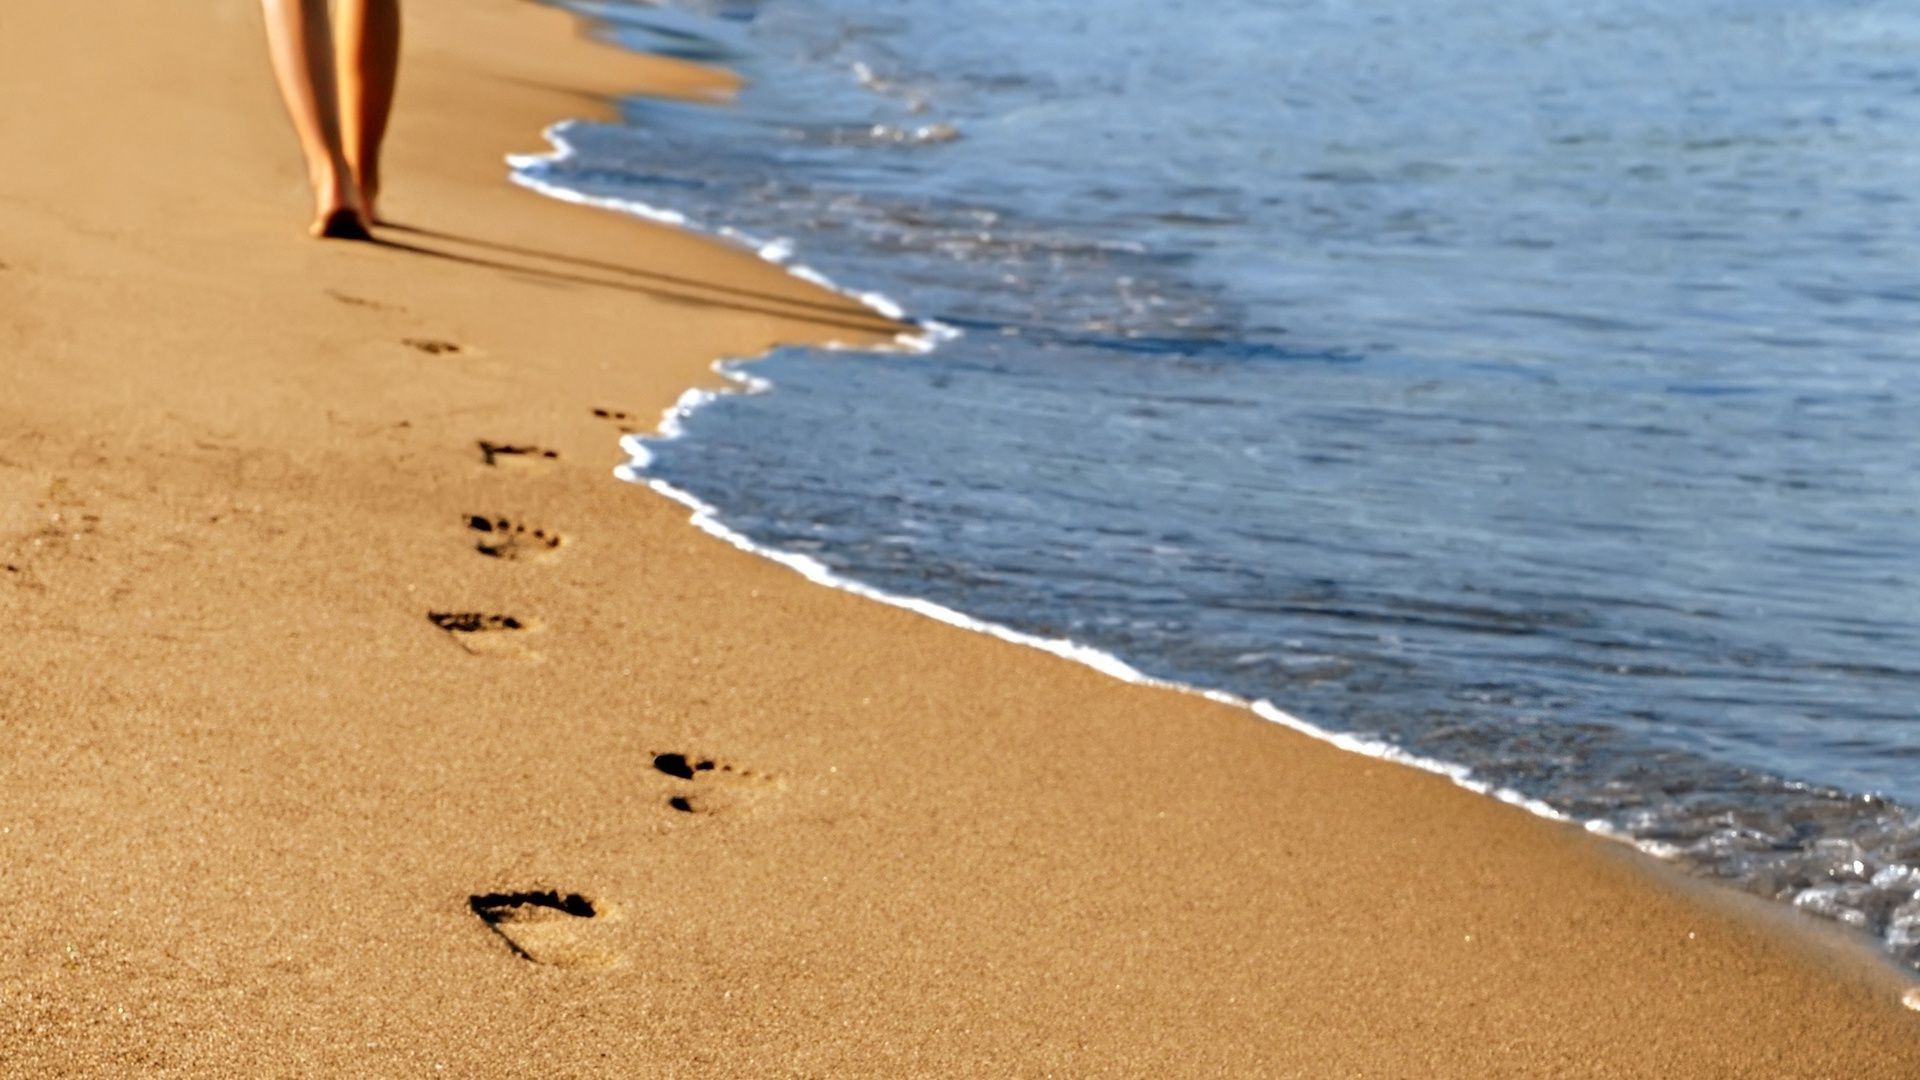 Footprints In The Sand HD Wallpapers - Wallpaper Cave